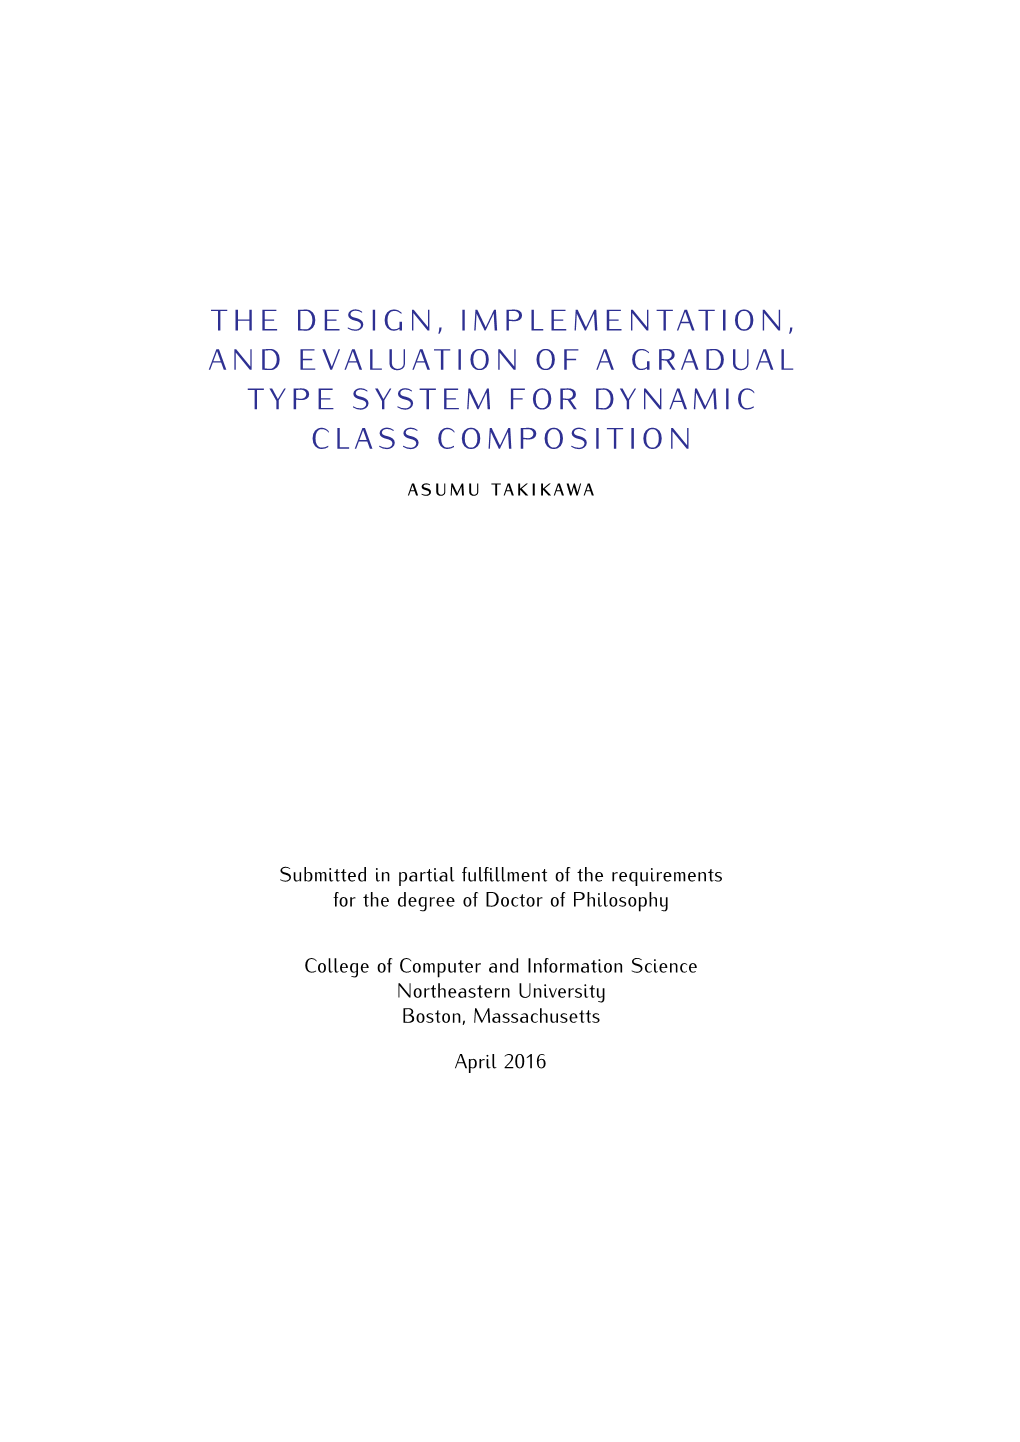 The Design, Implementation, and Evaluation of a Gradual Type System